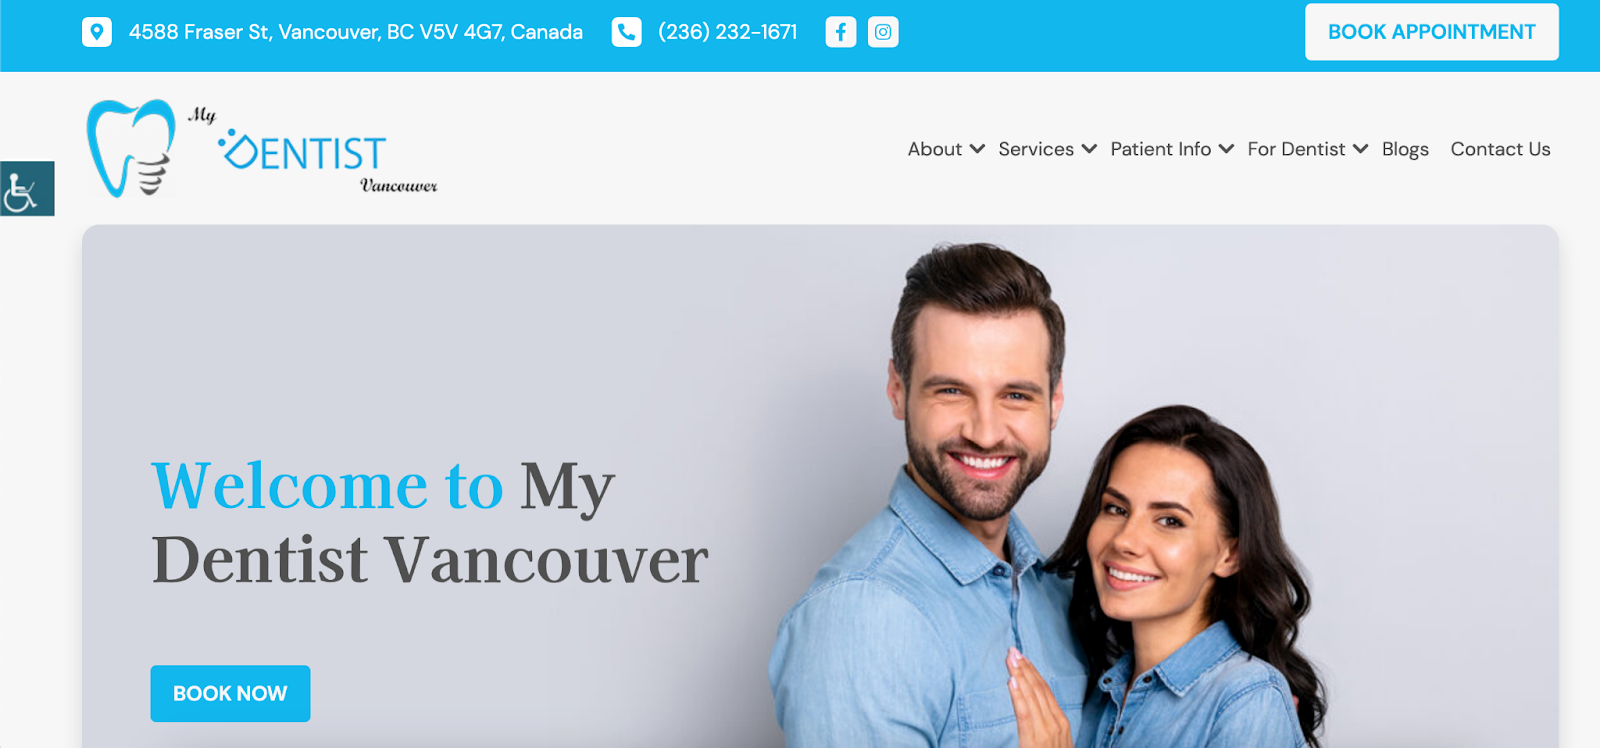 My Dentist Vancouver - #3 Best Dentist in Vancouver 